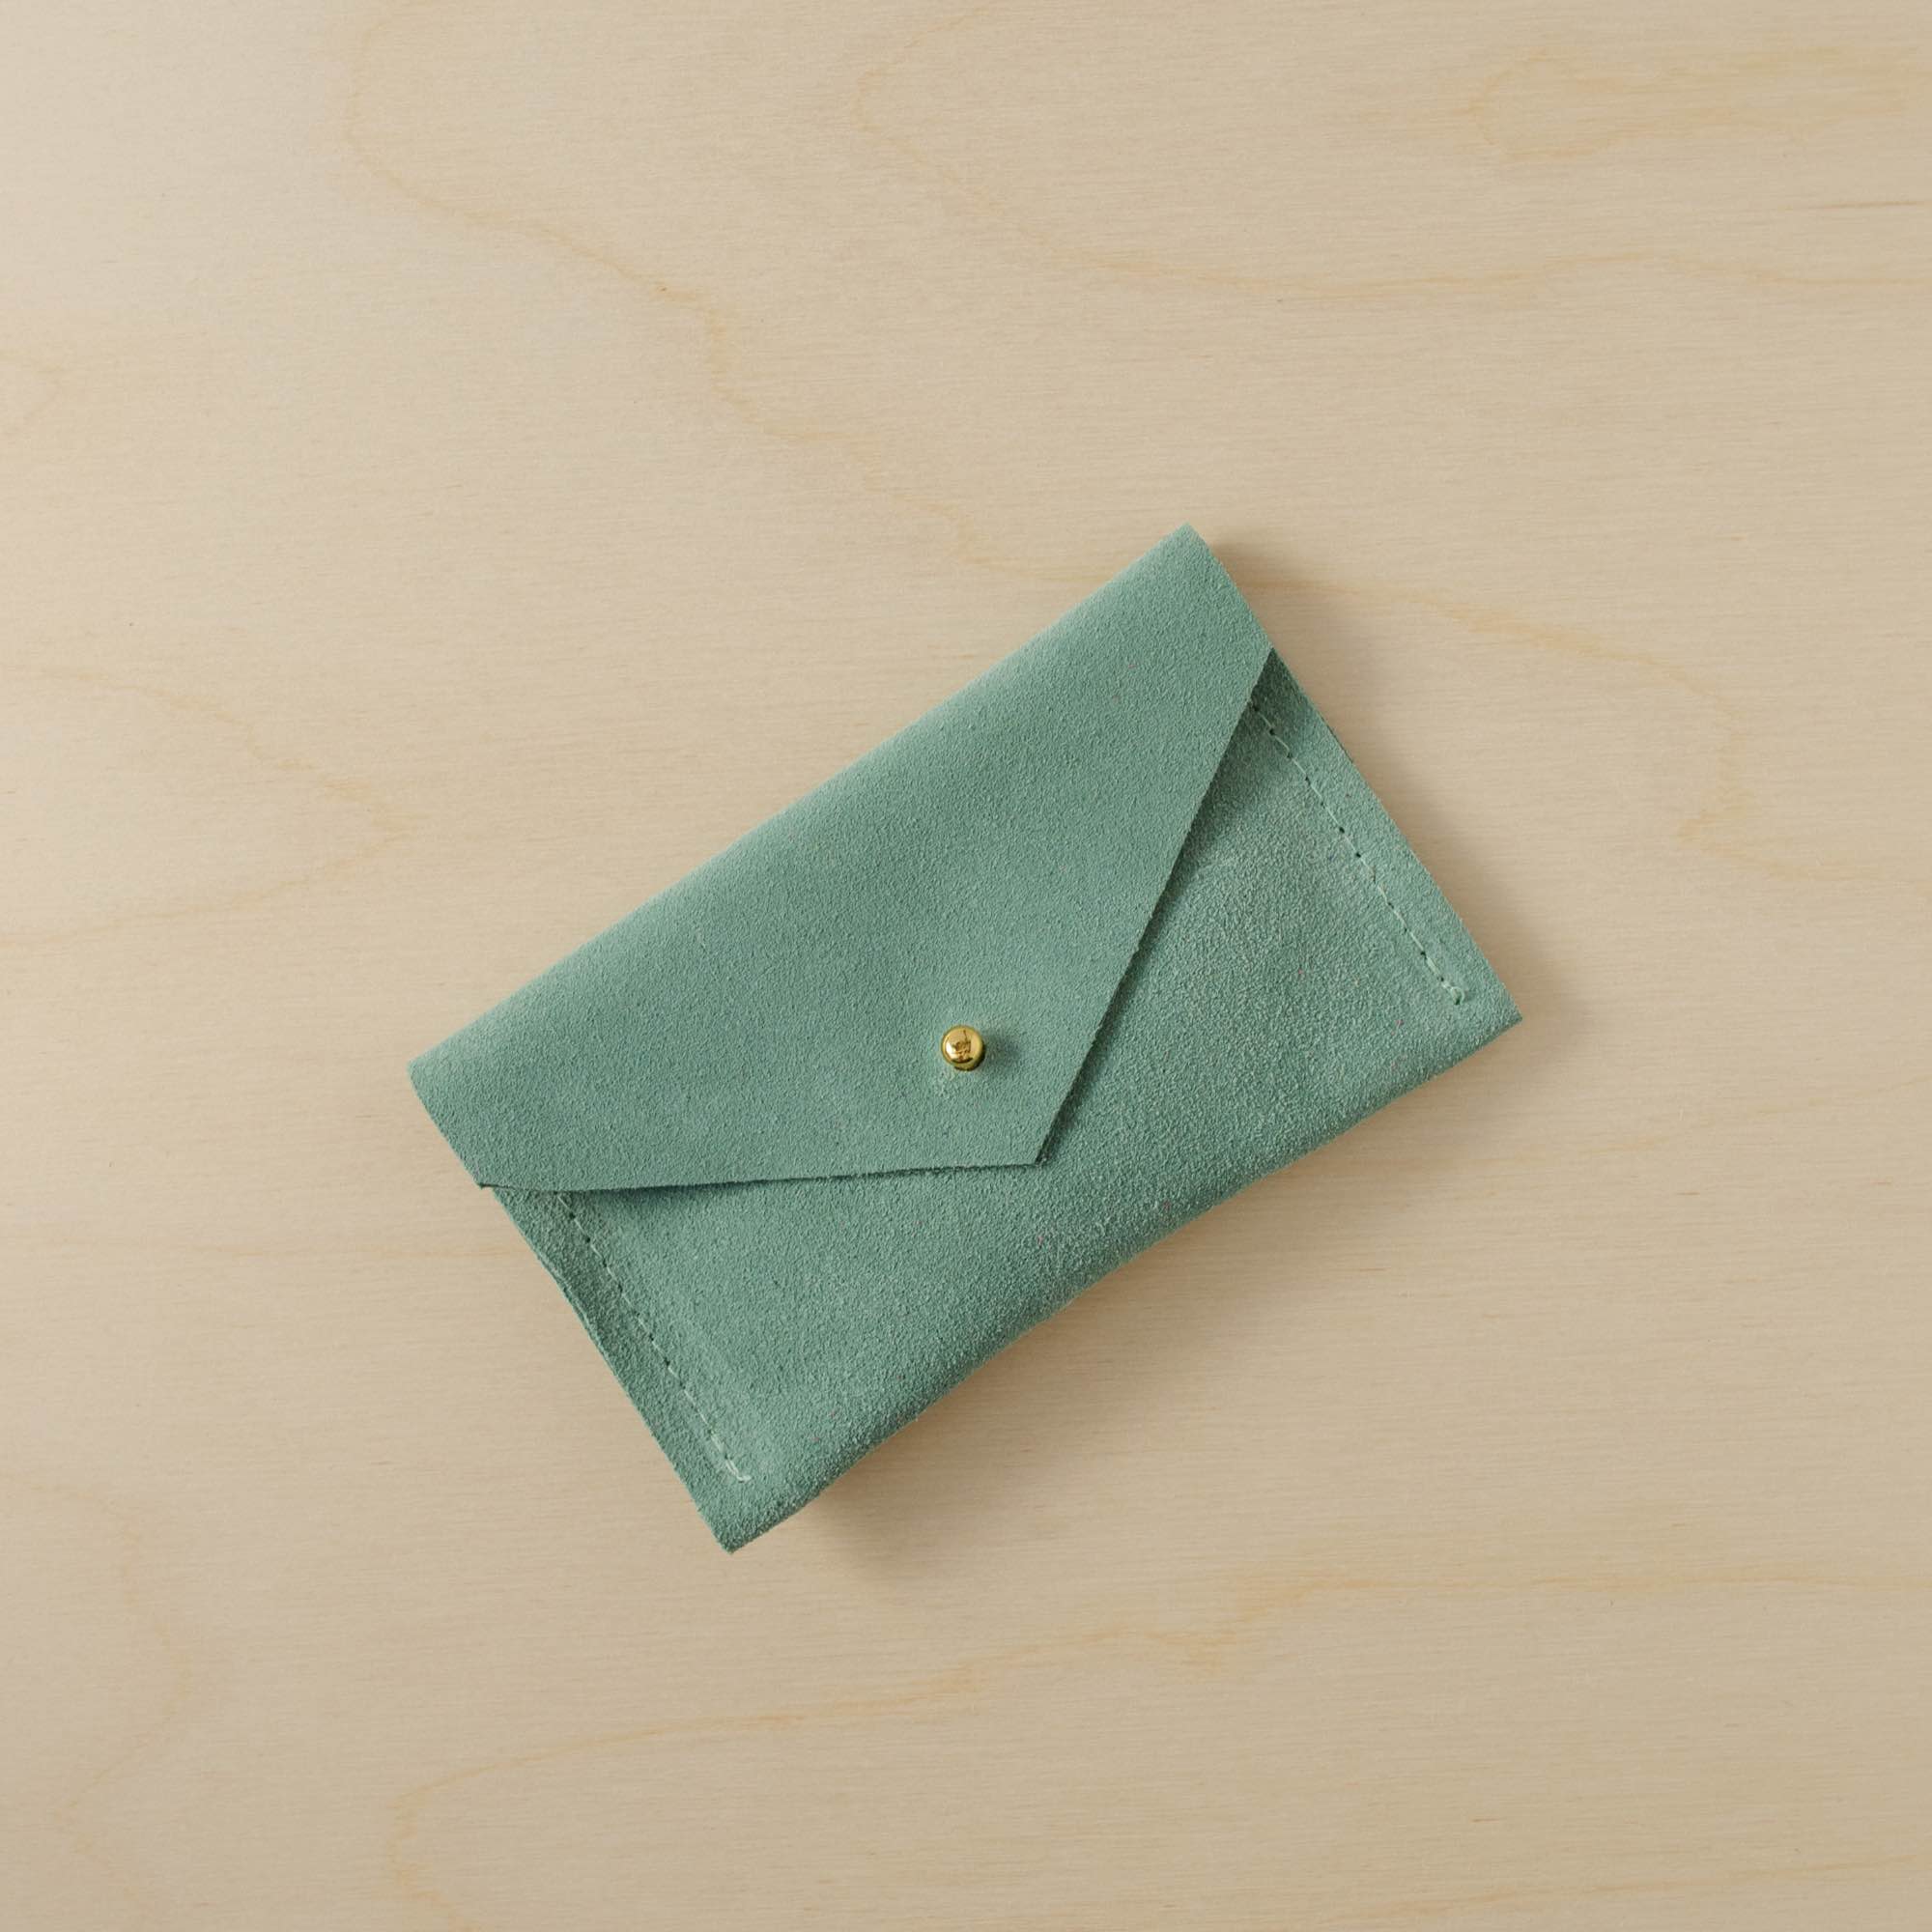 A suede Small Notions Pouch in Mint Green. Complete with a stud for secure closing.